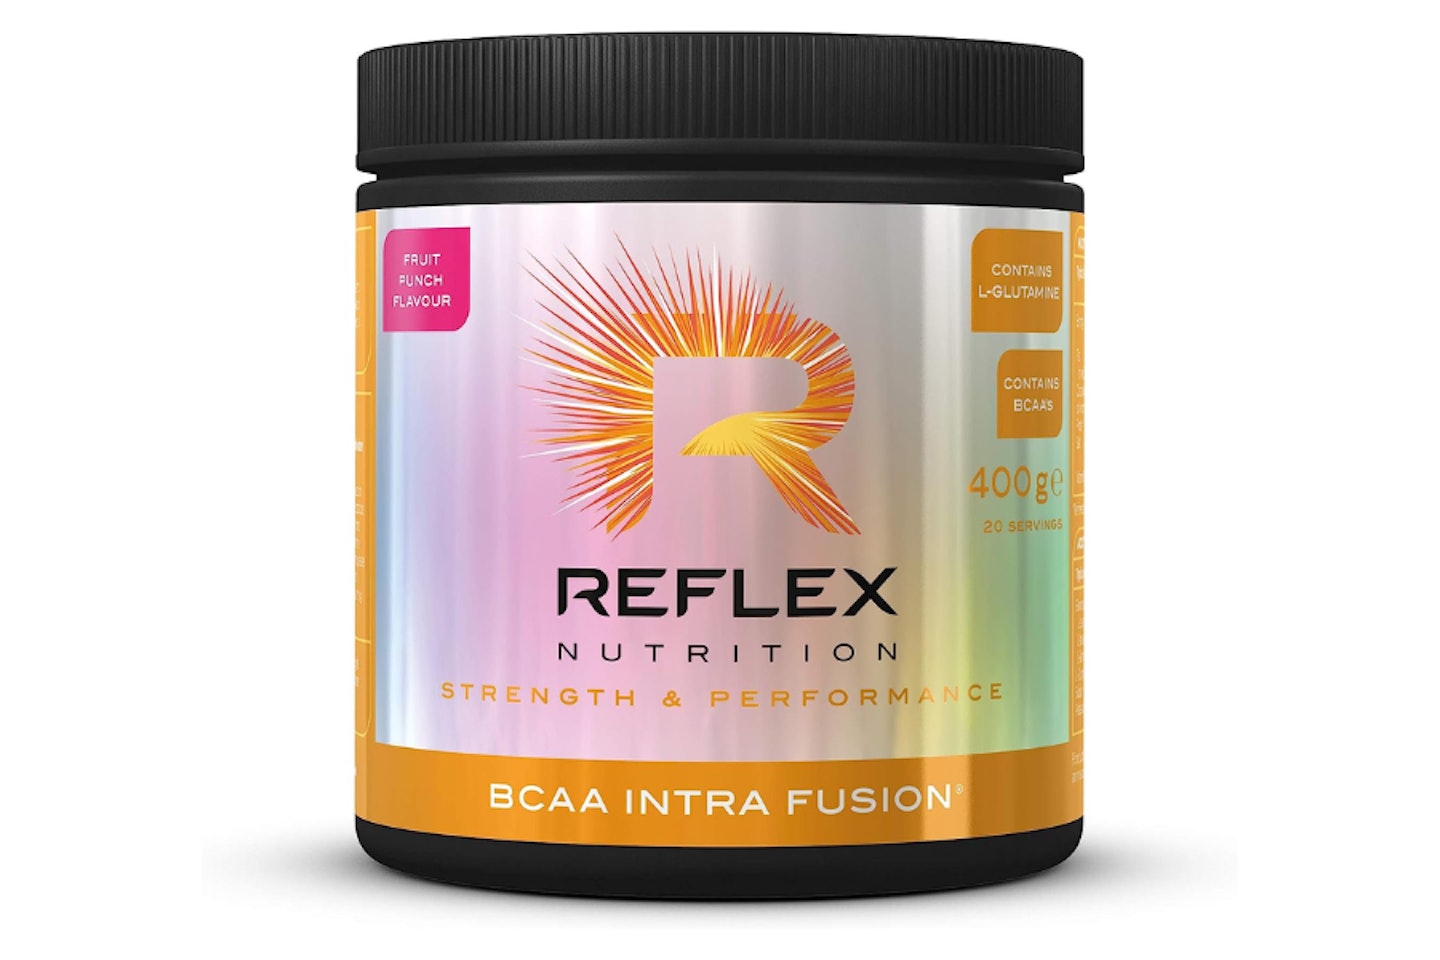 Reflex Nutrition BCAA Intra Fusion Intra Workout